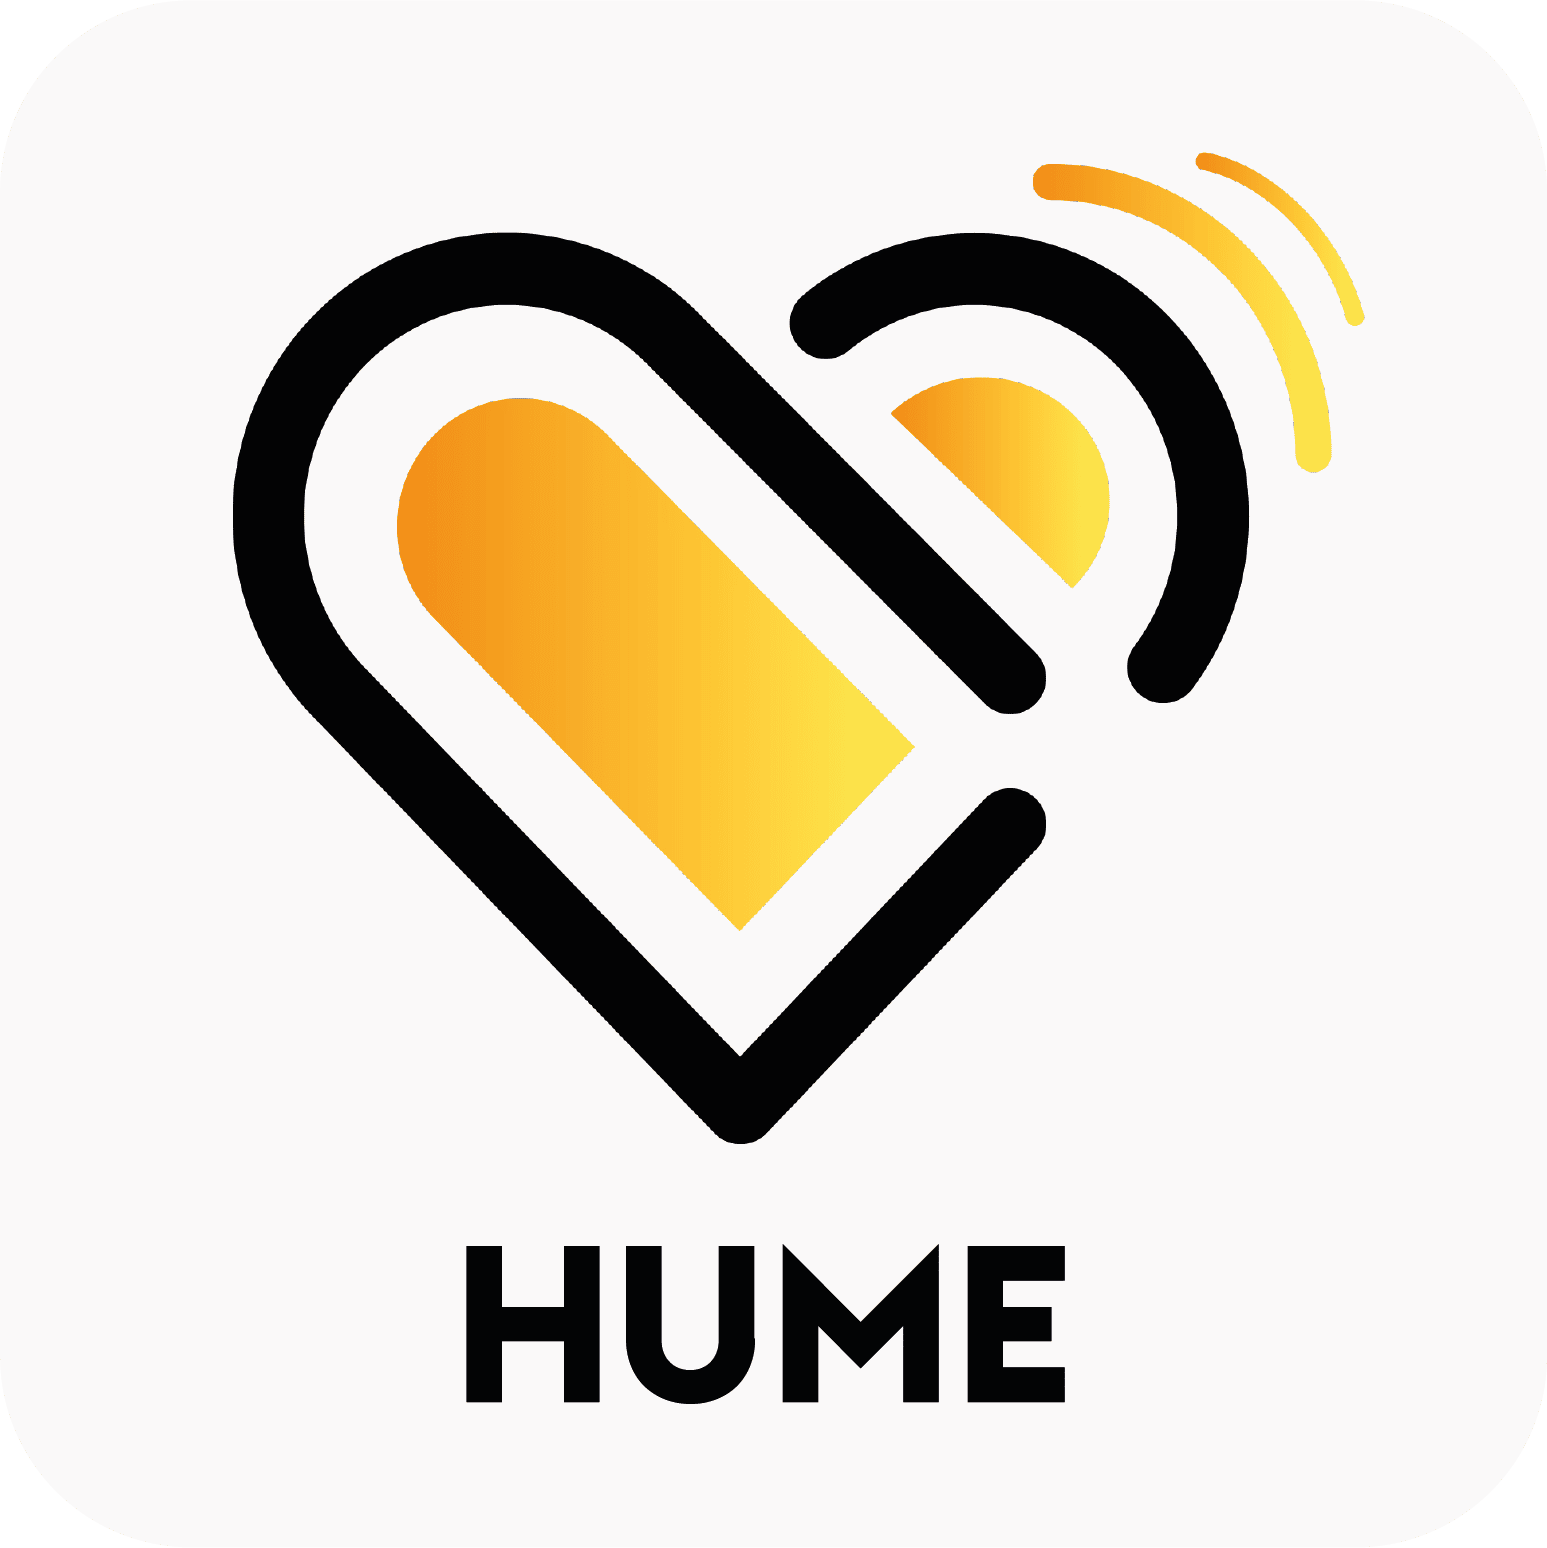 icon hume directory